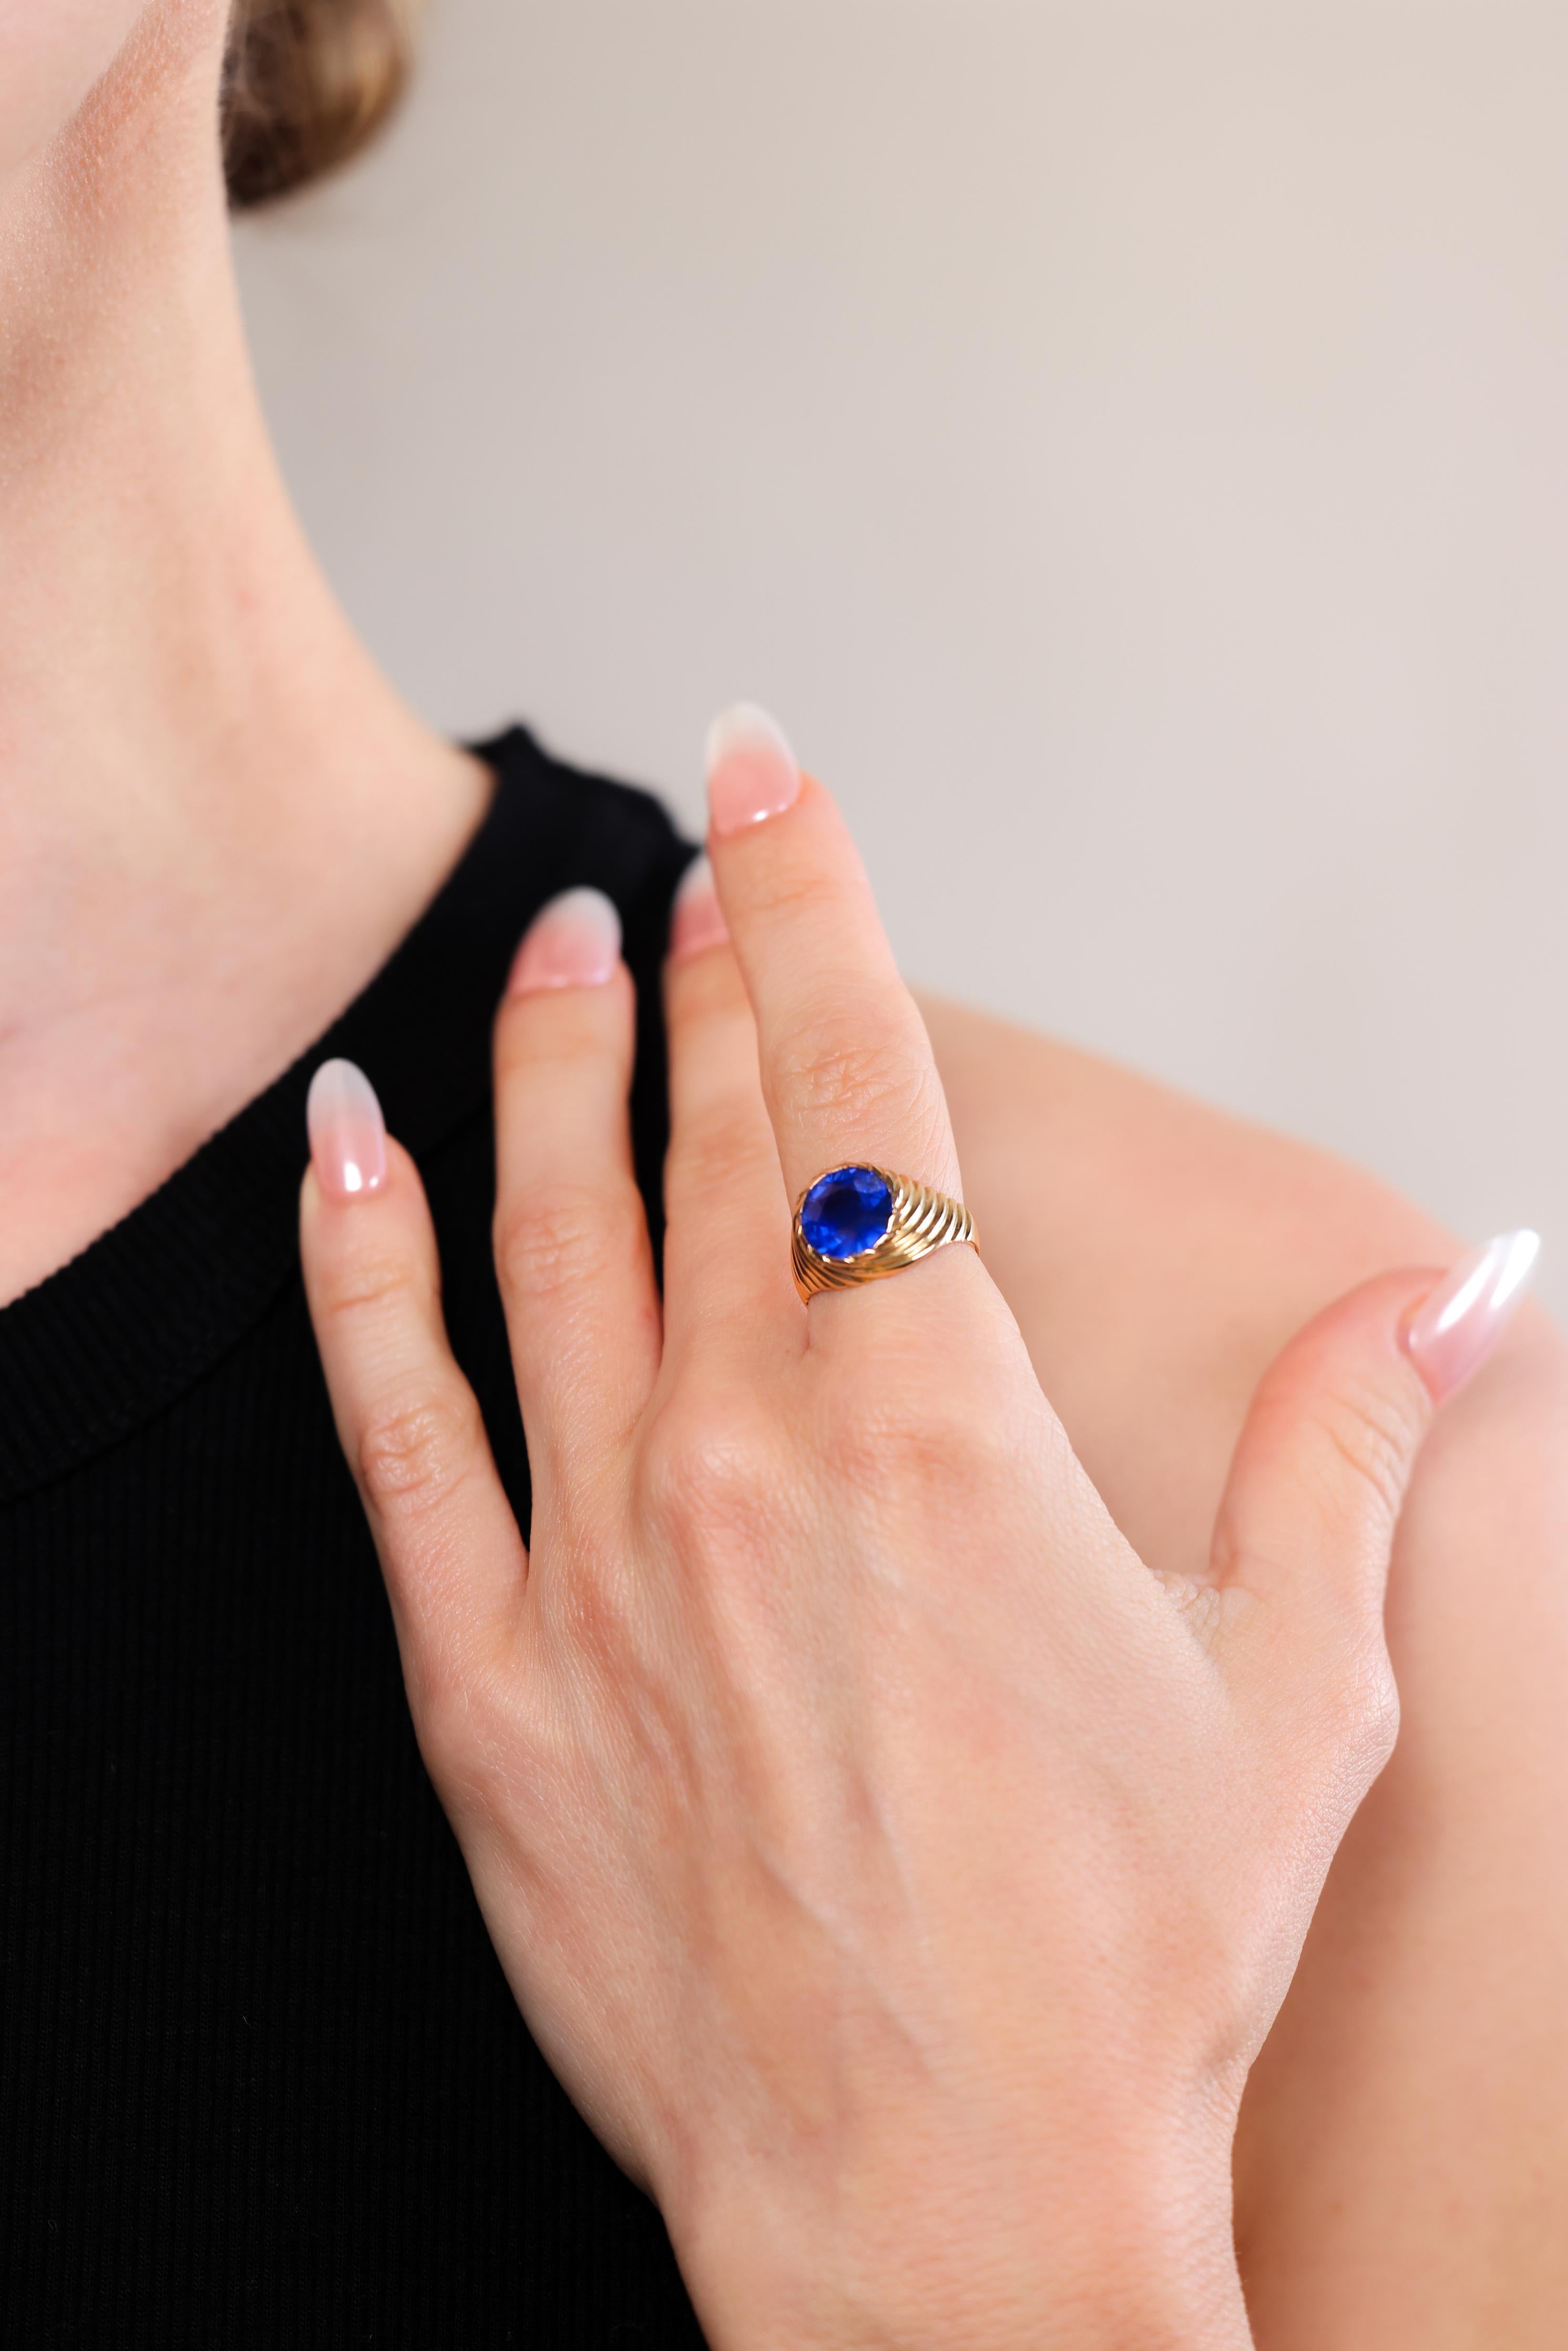 Certificate: AGL
Center Stone: Blue sapphire
Cut: Round
Weight: 4 carats approximately 
Metal: Fluted 18k yellow gold
Era: Retro
Circa: 1940s
Hallmarks: Purity marks
Size: 6-1/4 and can be resized 
Gram weight: 7.6
 
This exquisite ring exudes